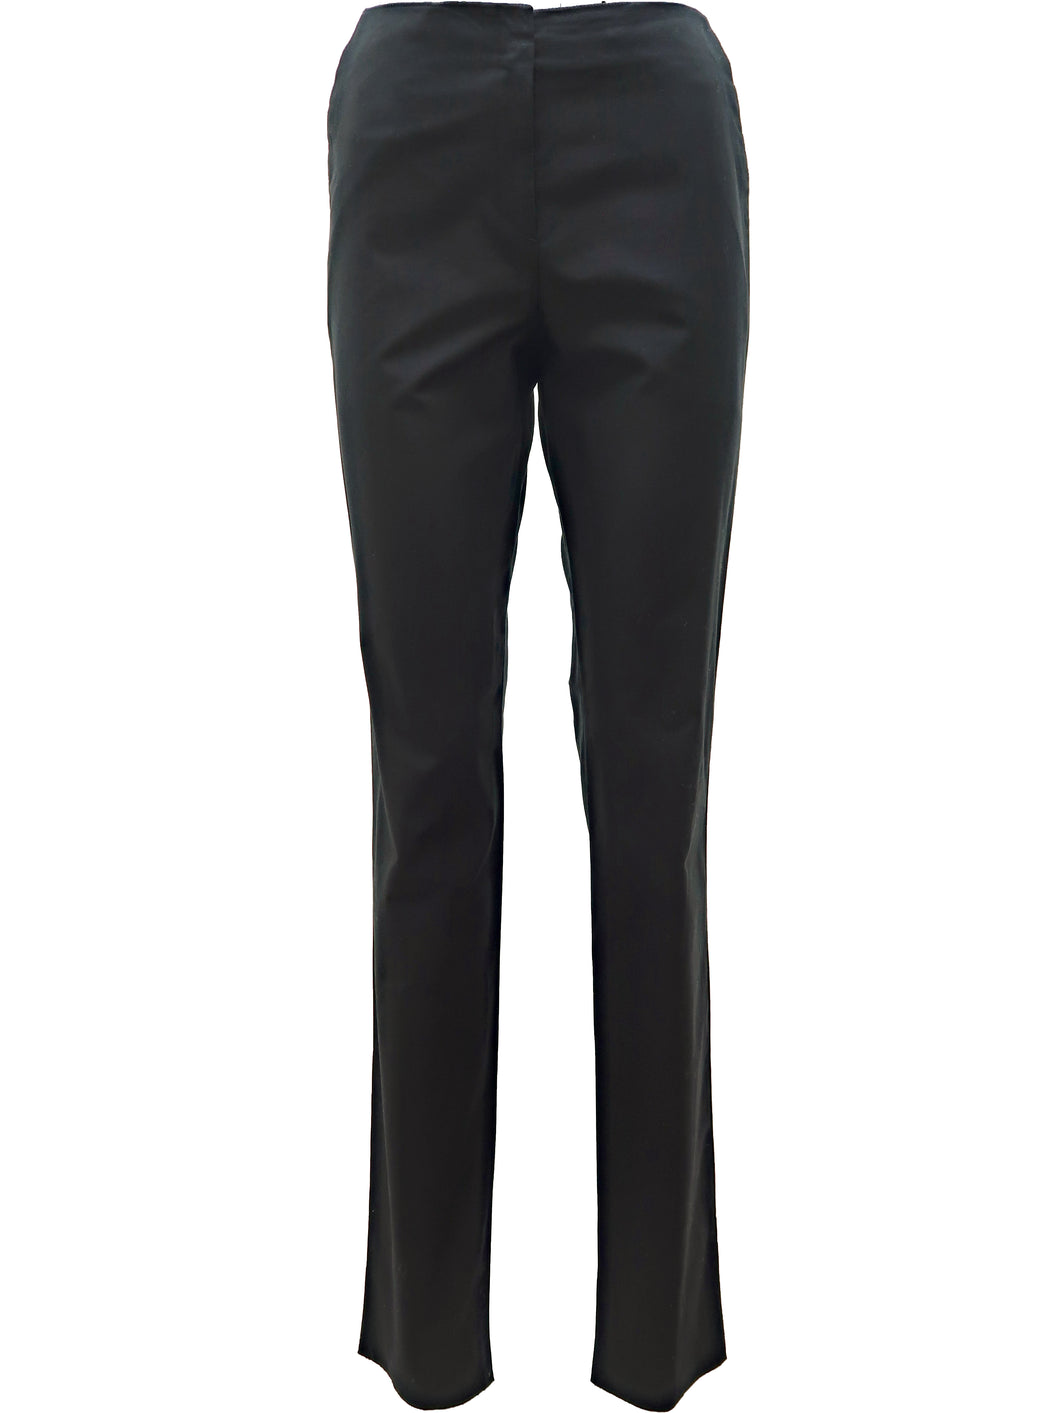 TOM FORD for YSL FW01 Tailored Silhouette Cotton Pants (black) FR42